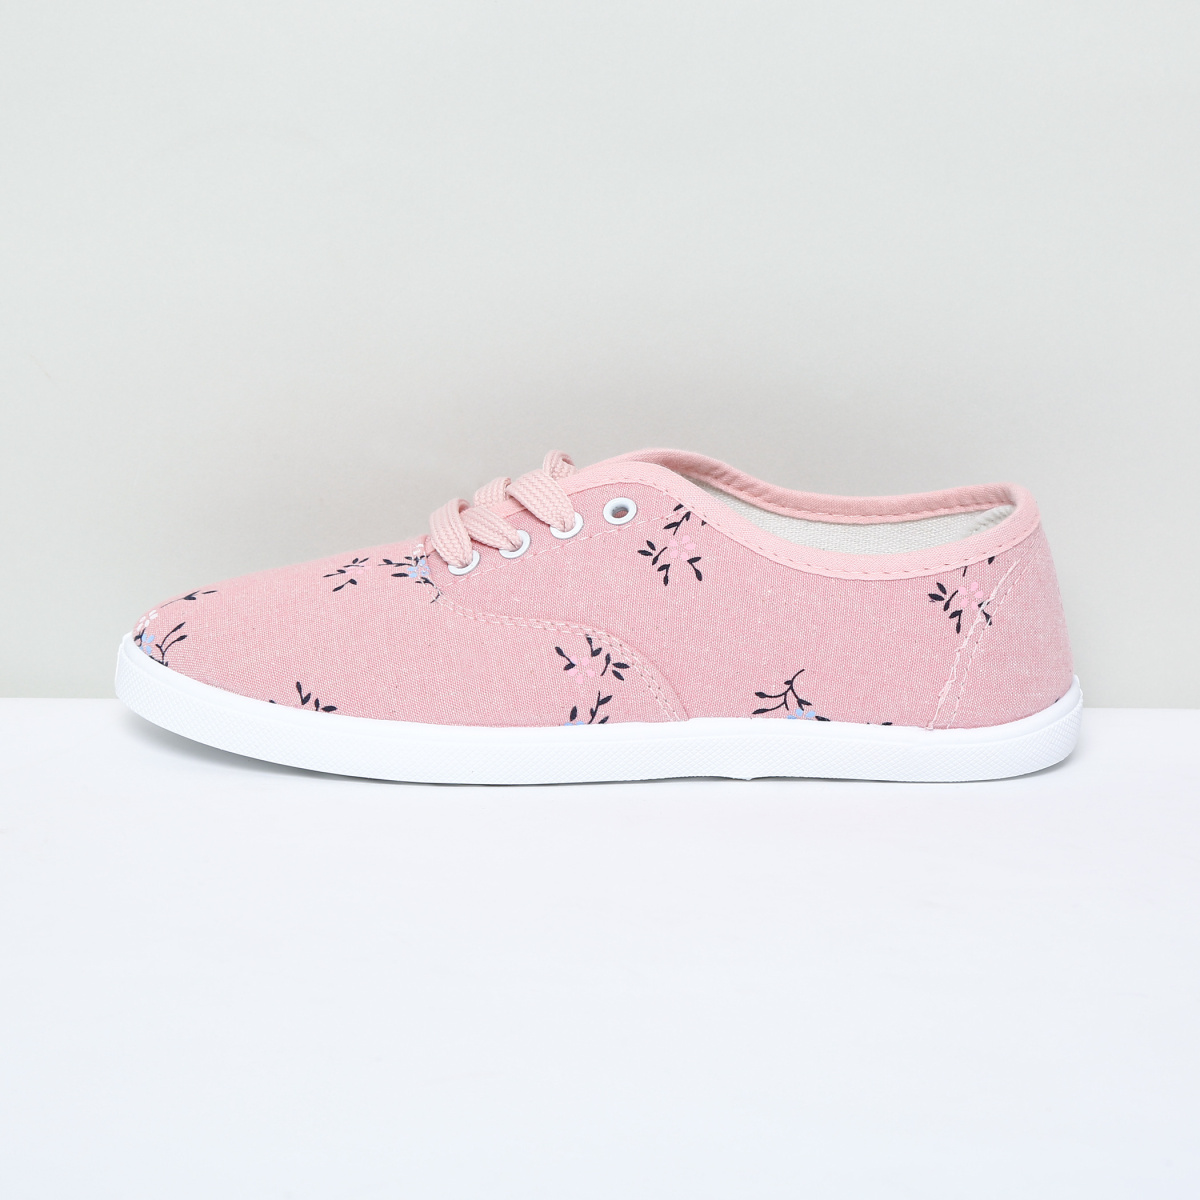 MAX Printed Lace-Up Shoes